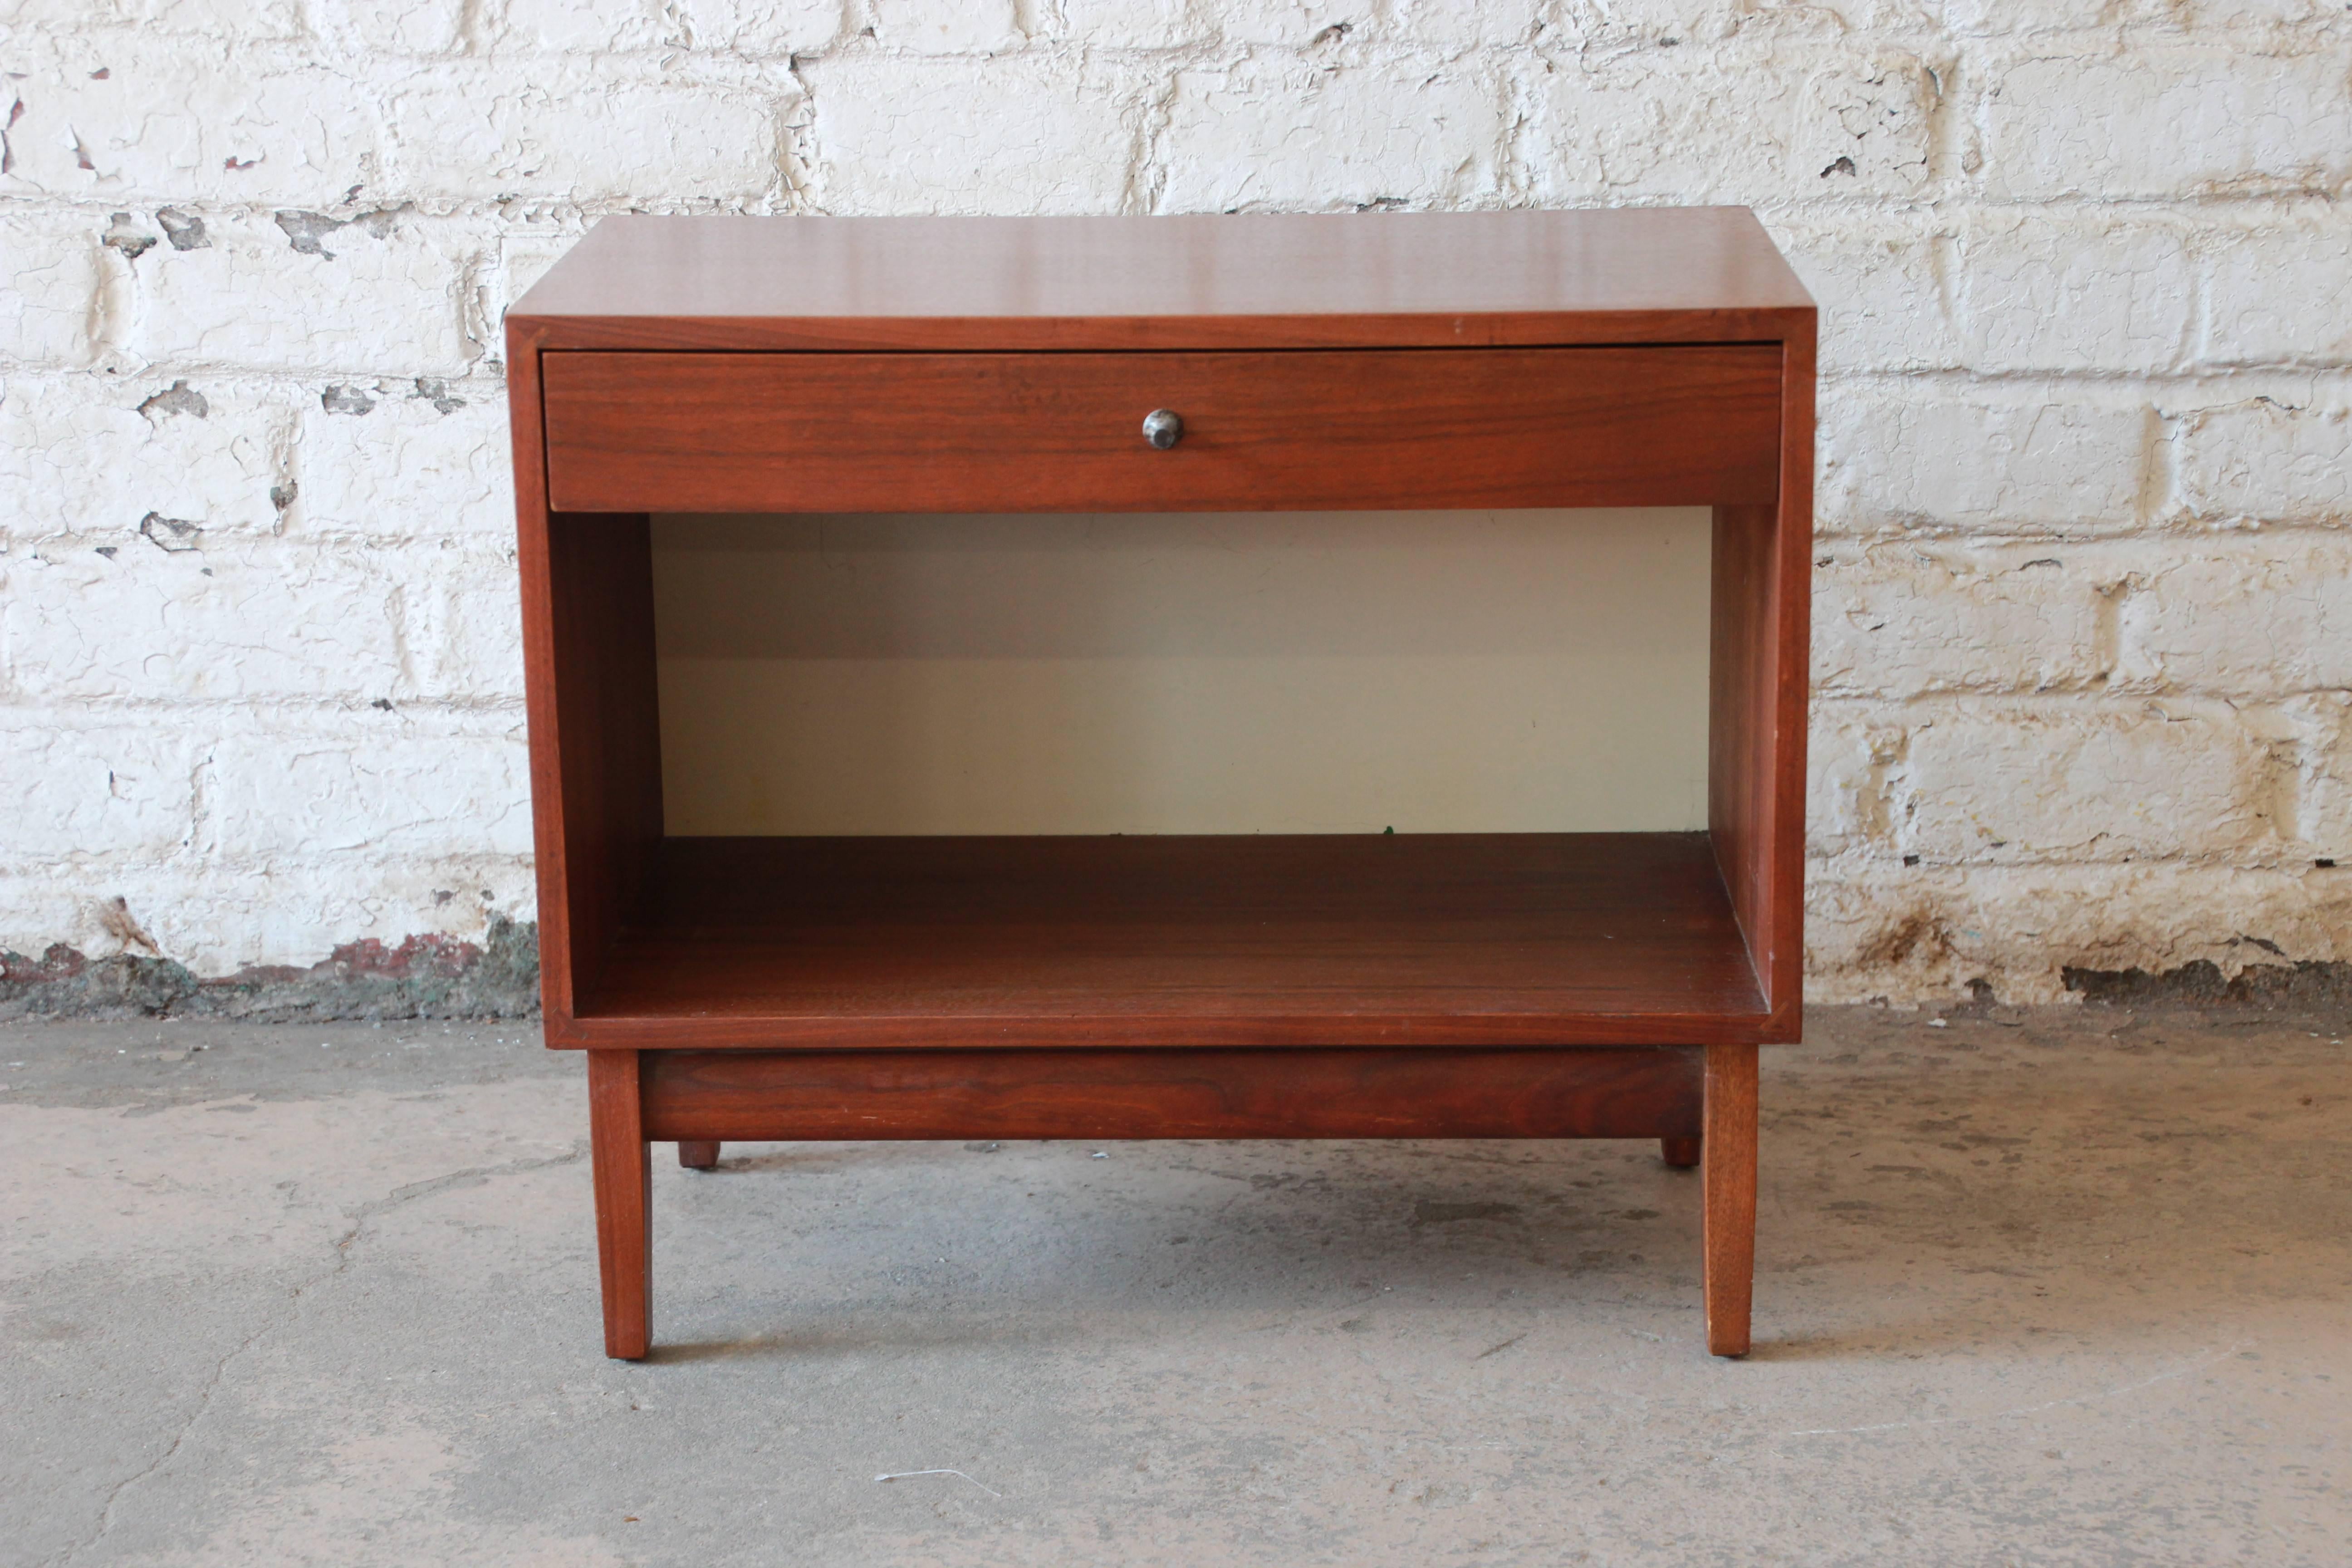 An outstanding Mid-Century Modern walnut nightstand designed by Kipp Stewart for his American Design Foundation line for Calvin Furniture, circa 1950s. The nightstand features gorgeous walnut wood grain and sleek mid-century design. It offers good